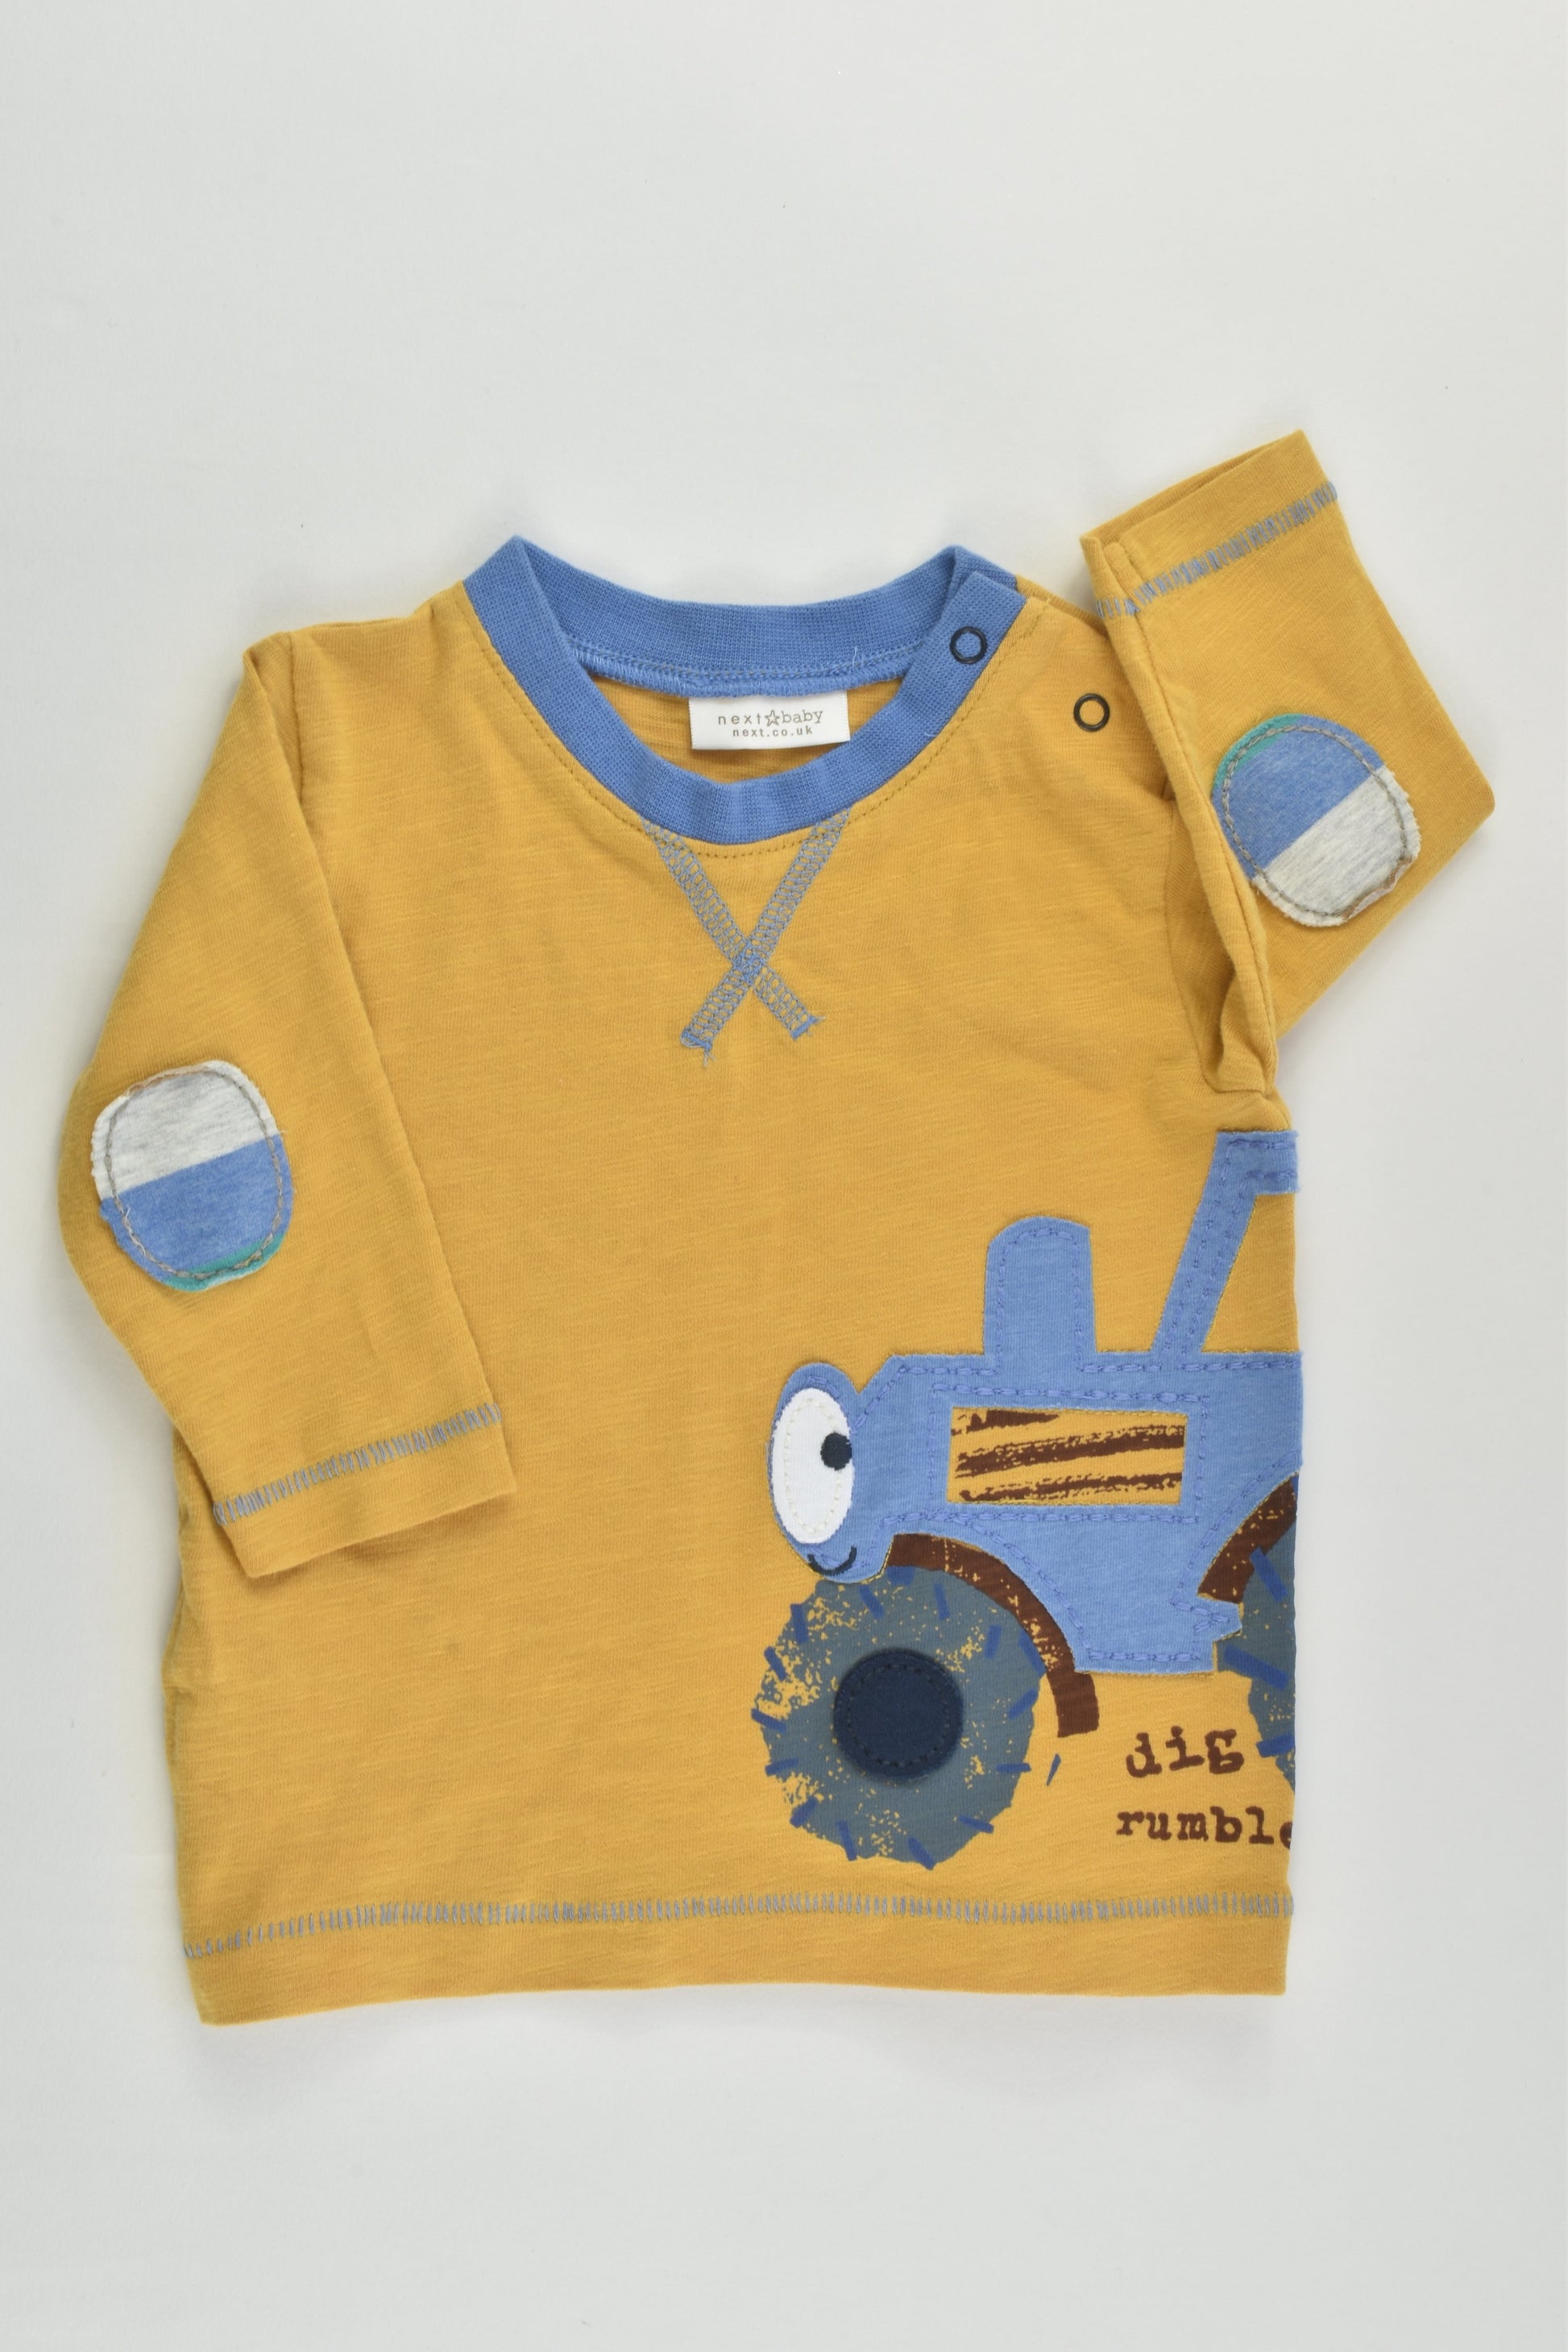 Next (UK) Size 000 (Up to 3 months) 'Dig, Rumble' Top